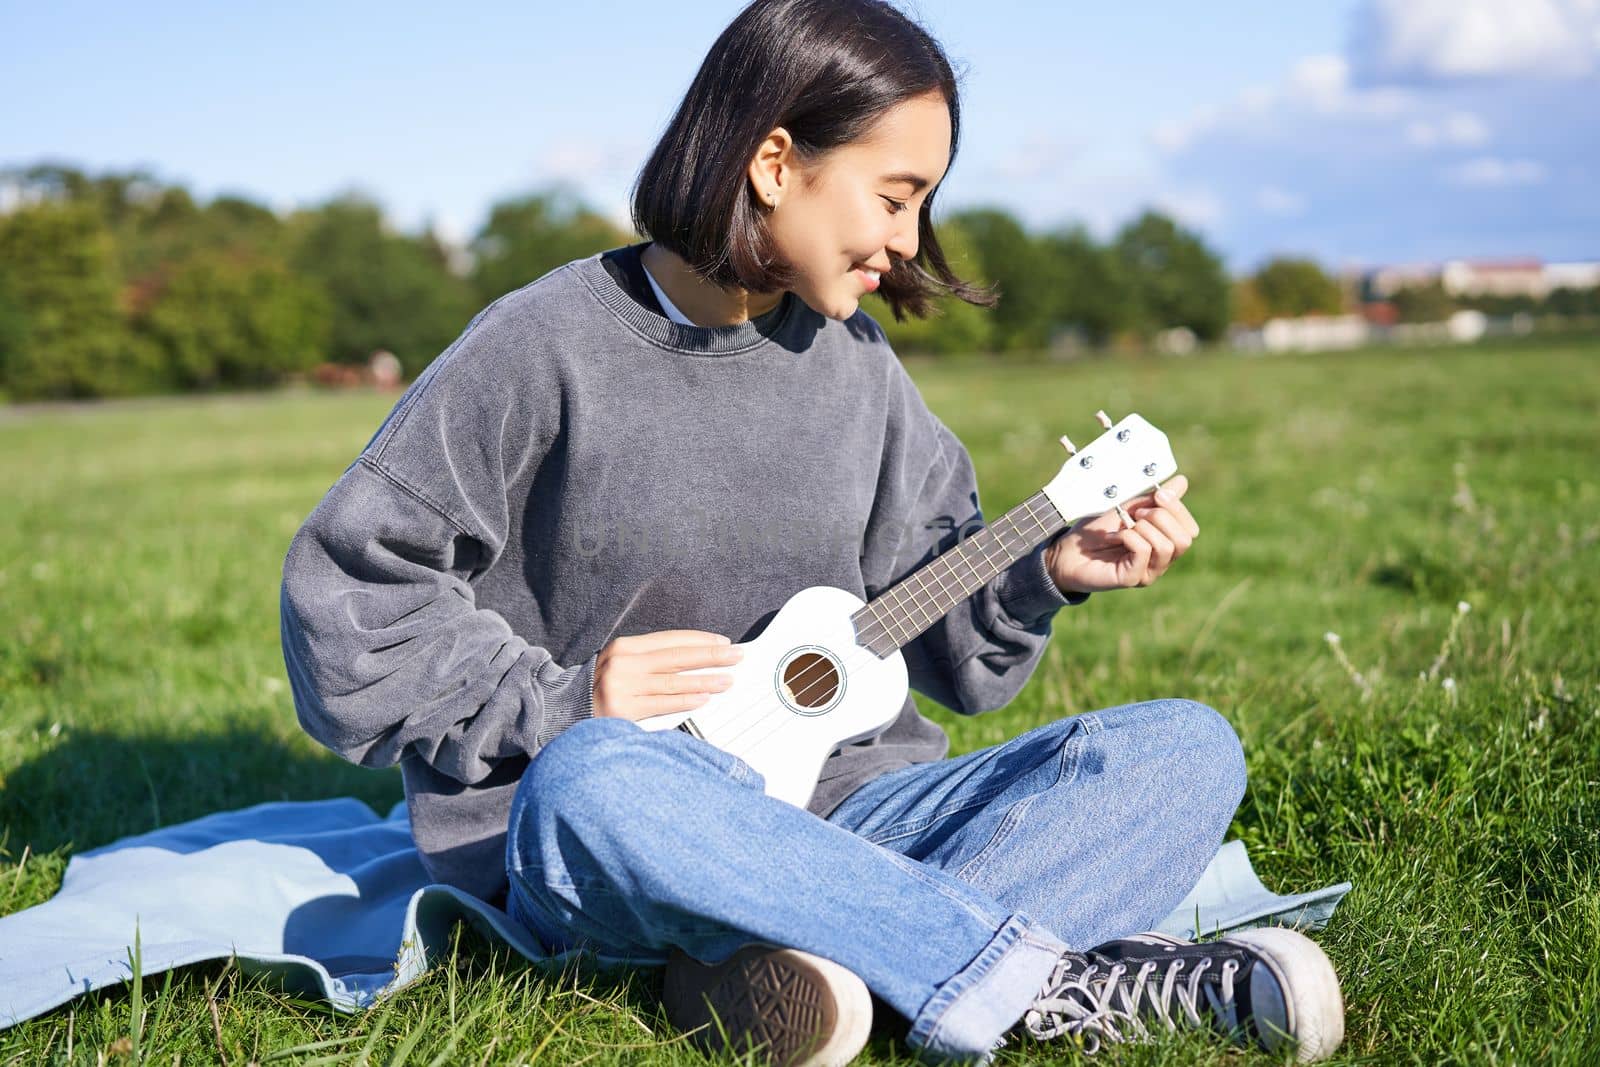 Asian smiling girl tuning her ukulele guitar, singing and playing in park, sitting on blanket on sunny day.